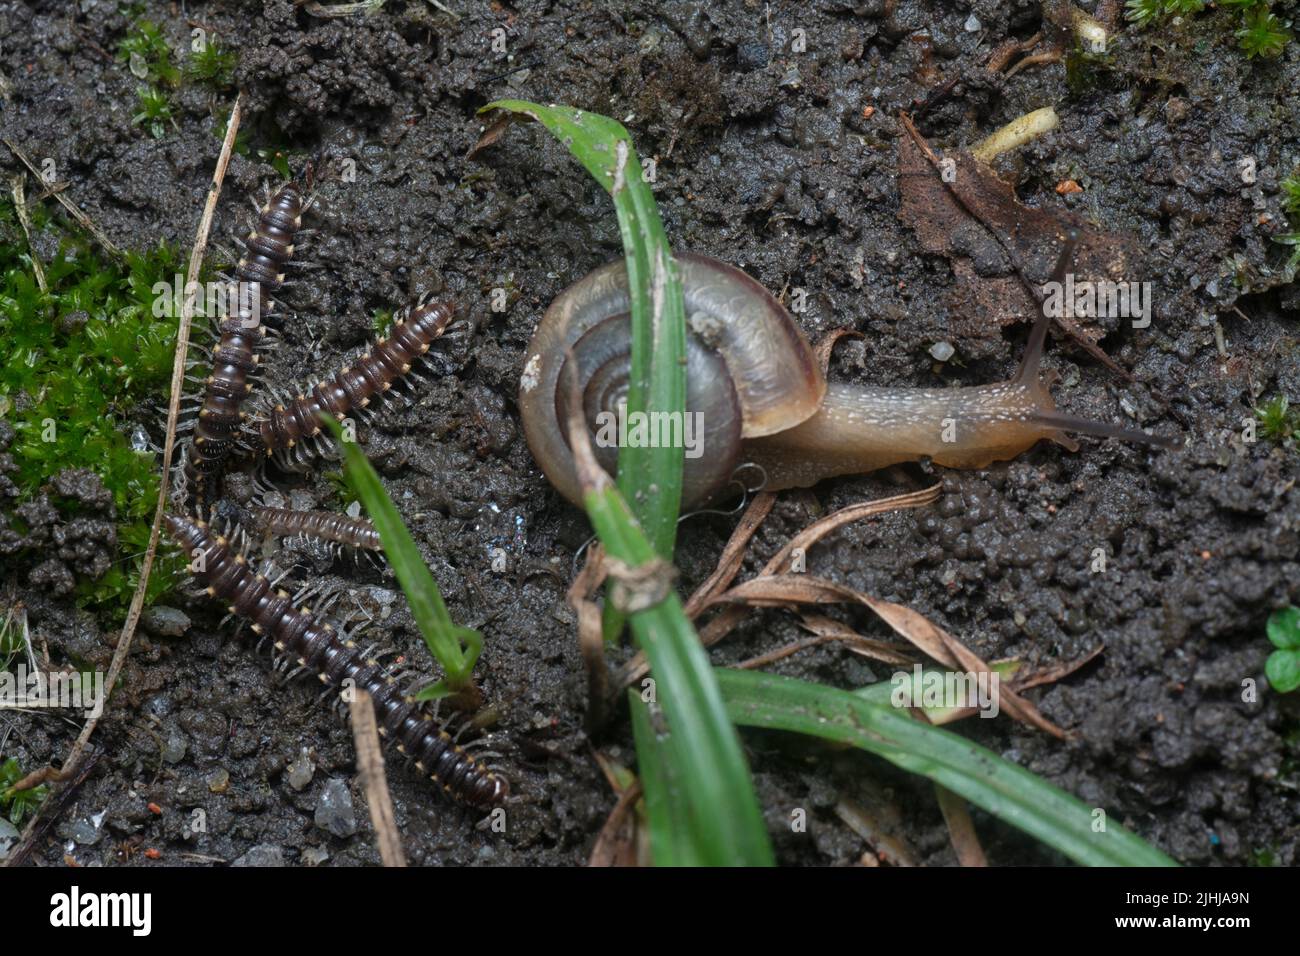 garden rotund disc snail and Yellow-spotted millipedes crawling on the ground Stock Photo